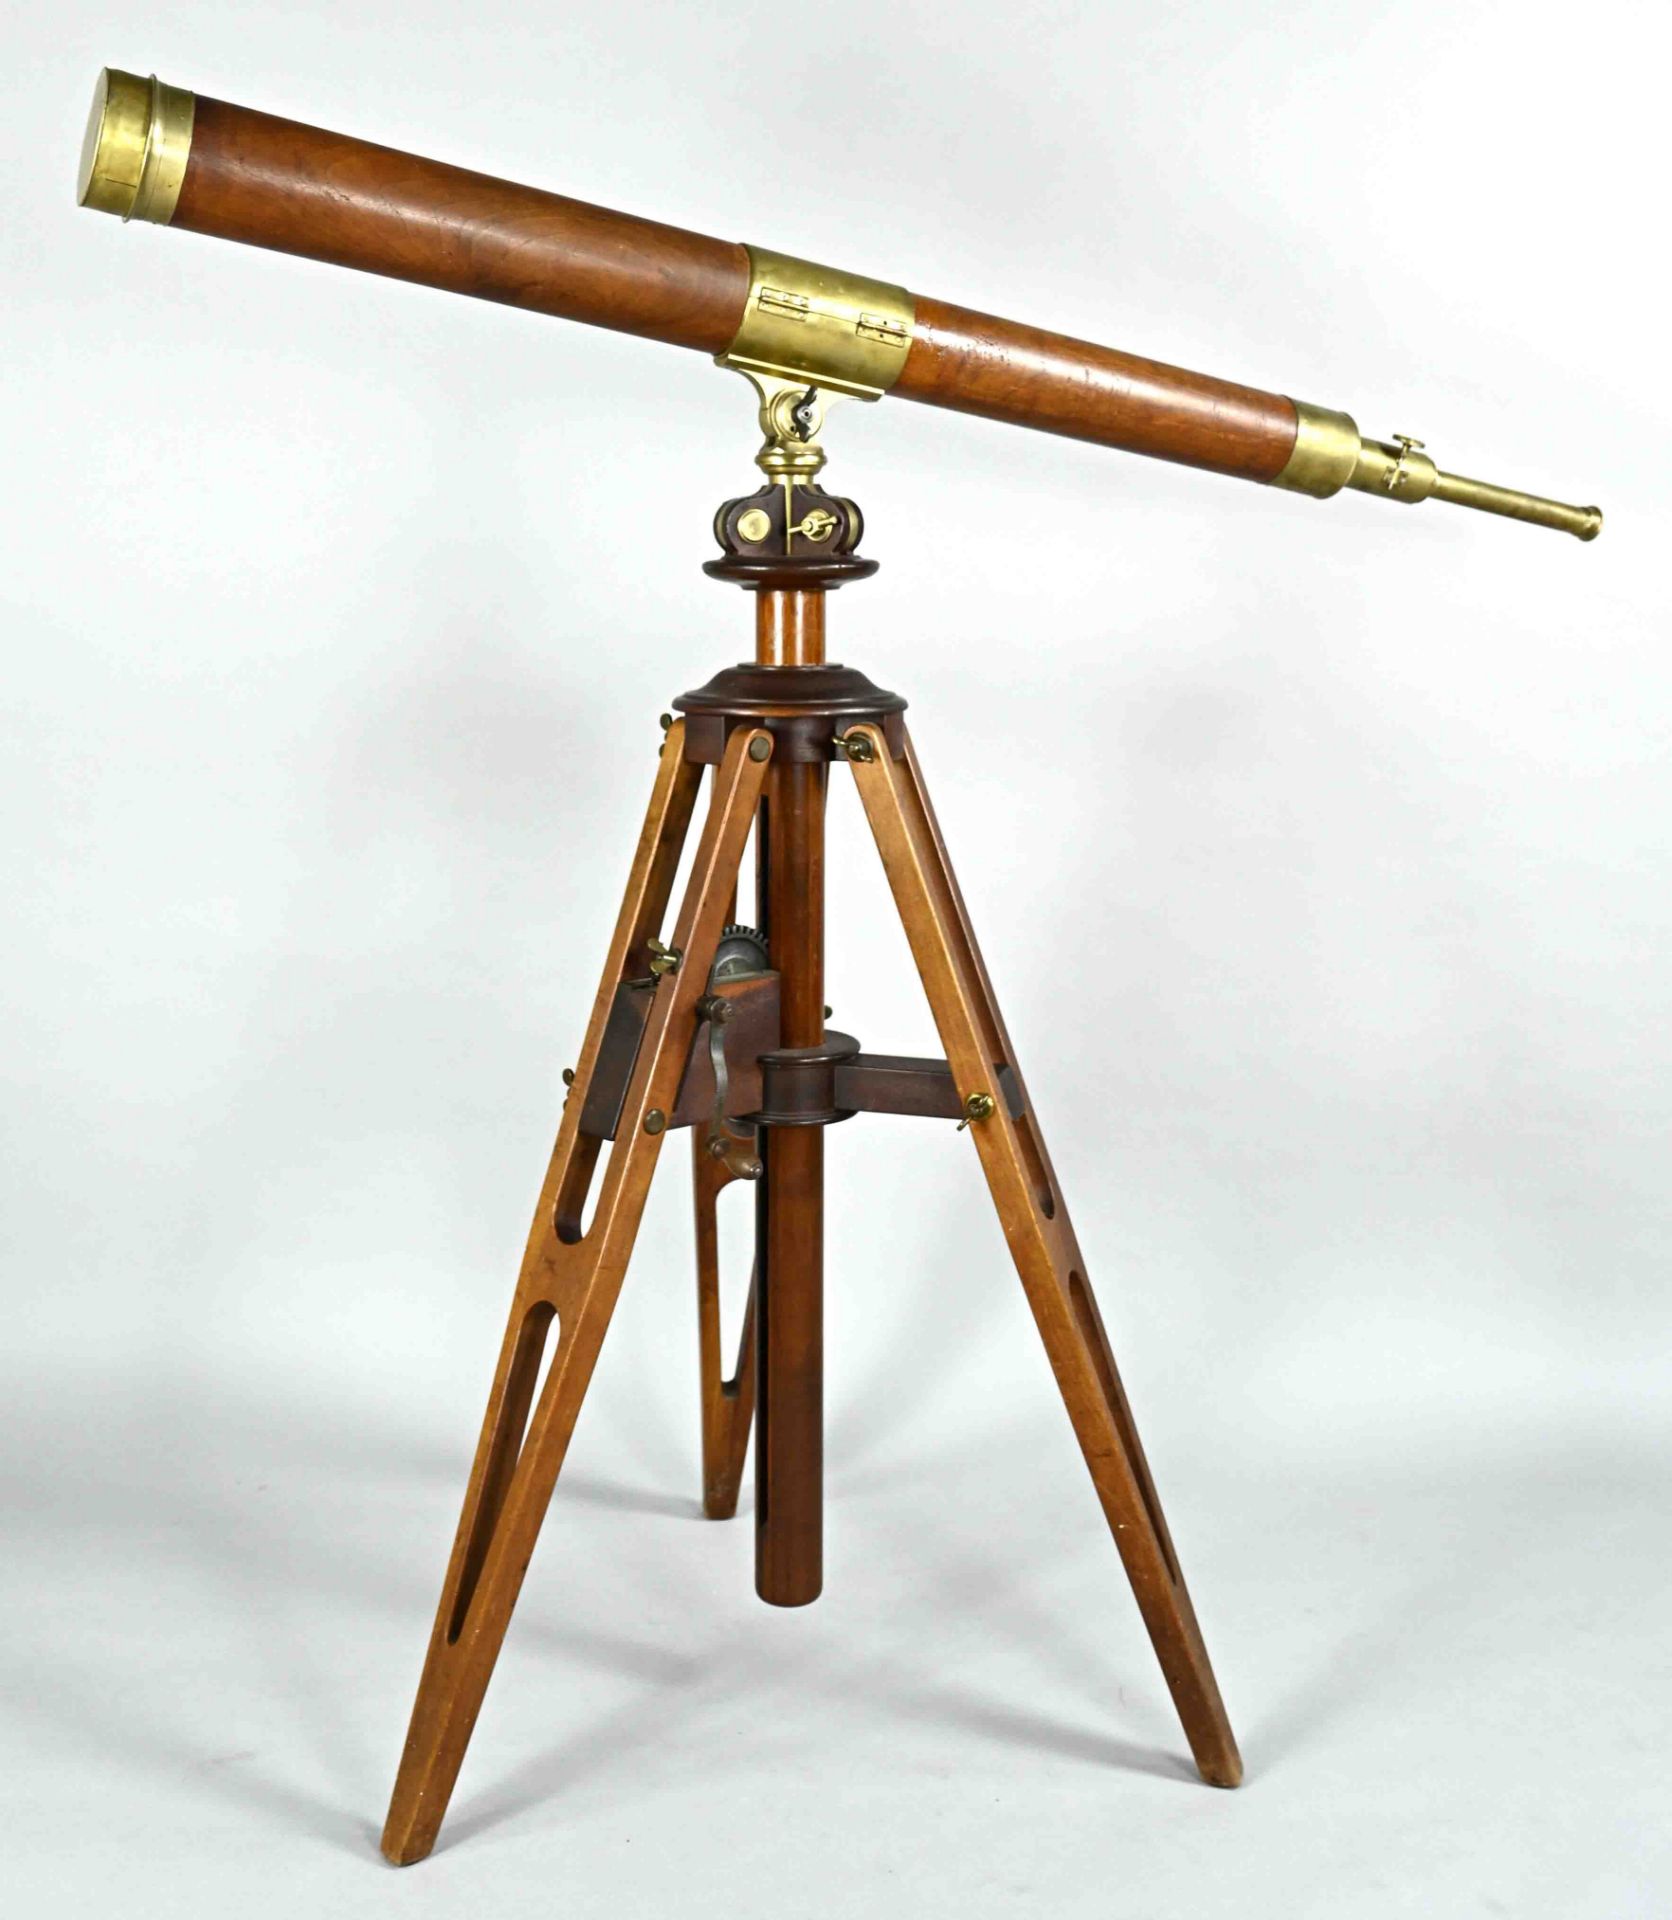 Large telescope on tripod, Germany, mid-19th century, Woerle & brothers von Ruedorffer, walnut and 